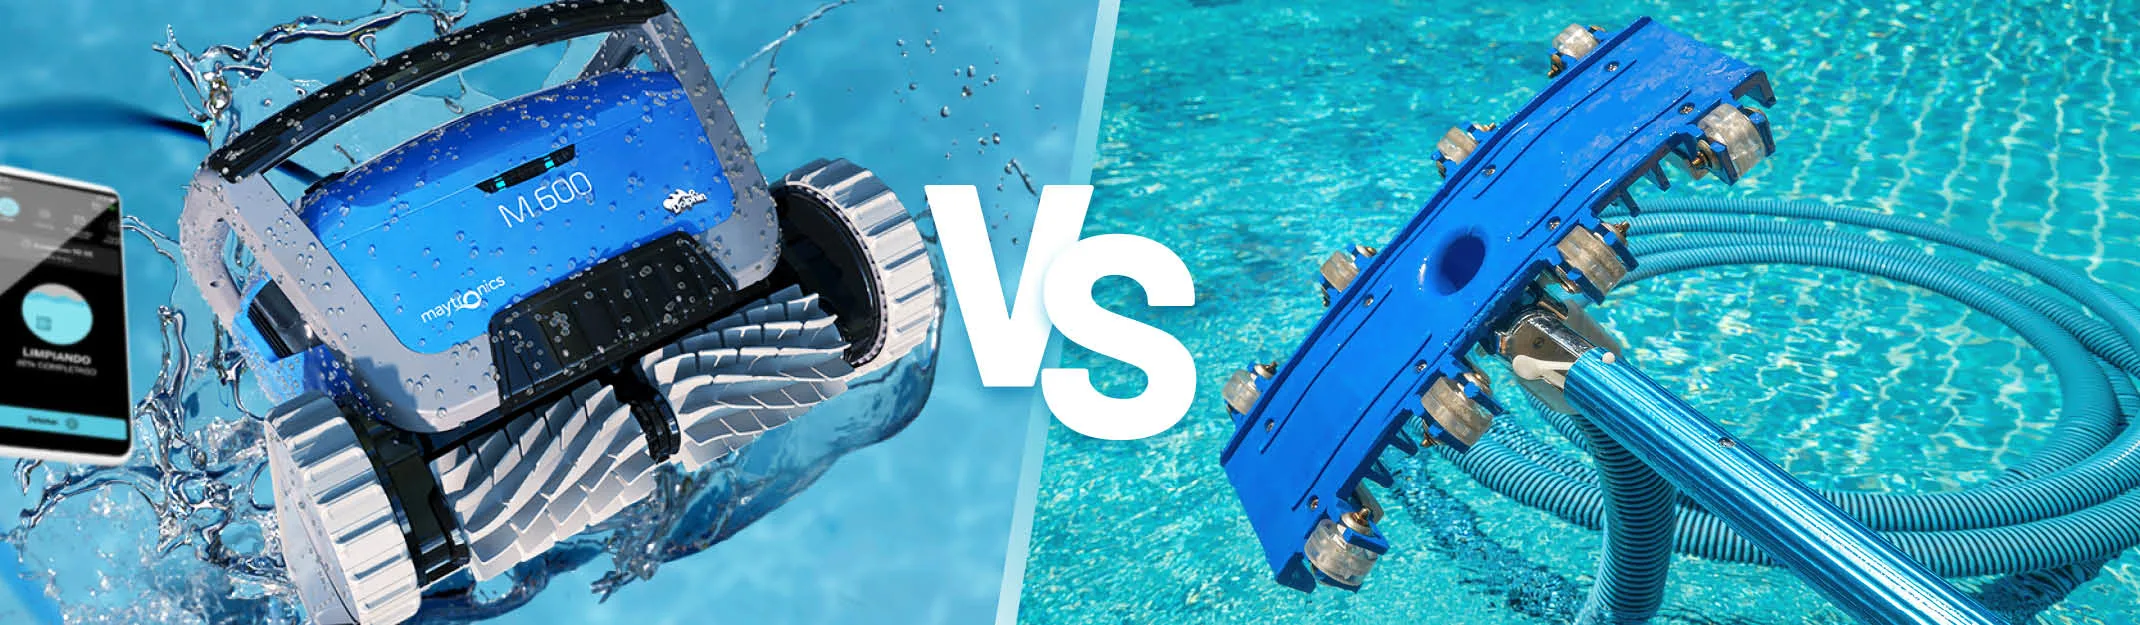 Differences between suction cleaners and Dolphin robotic pool cleaners